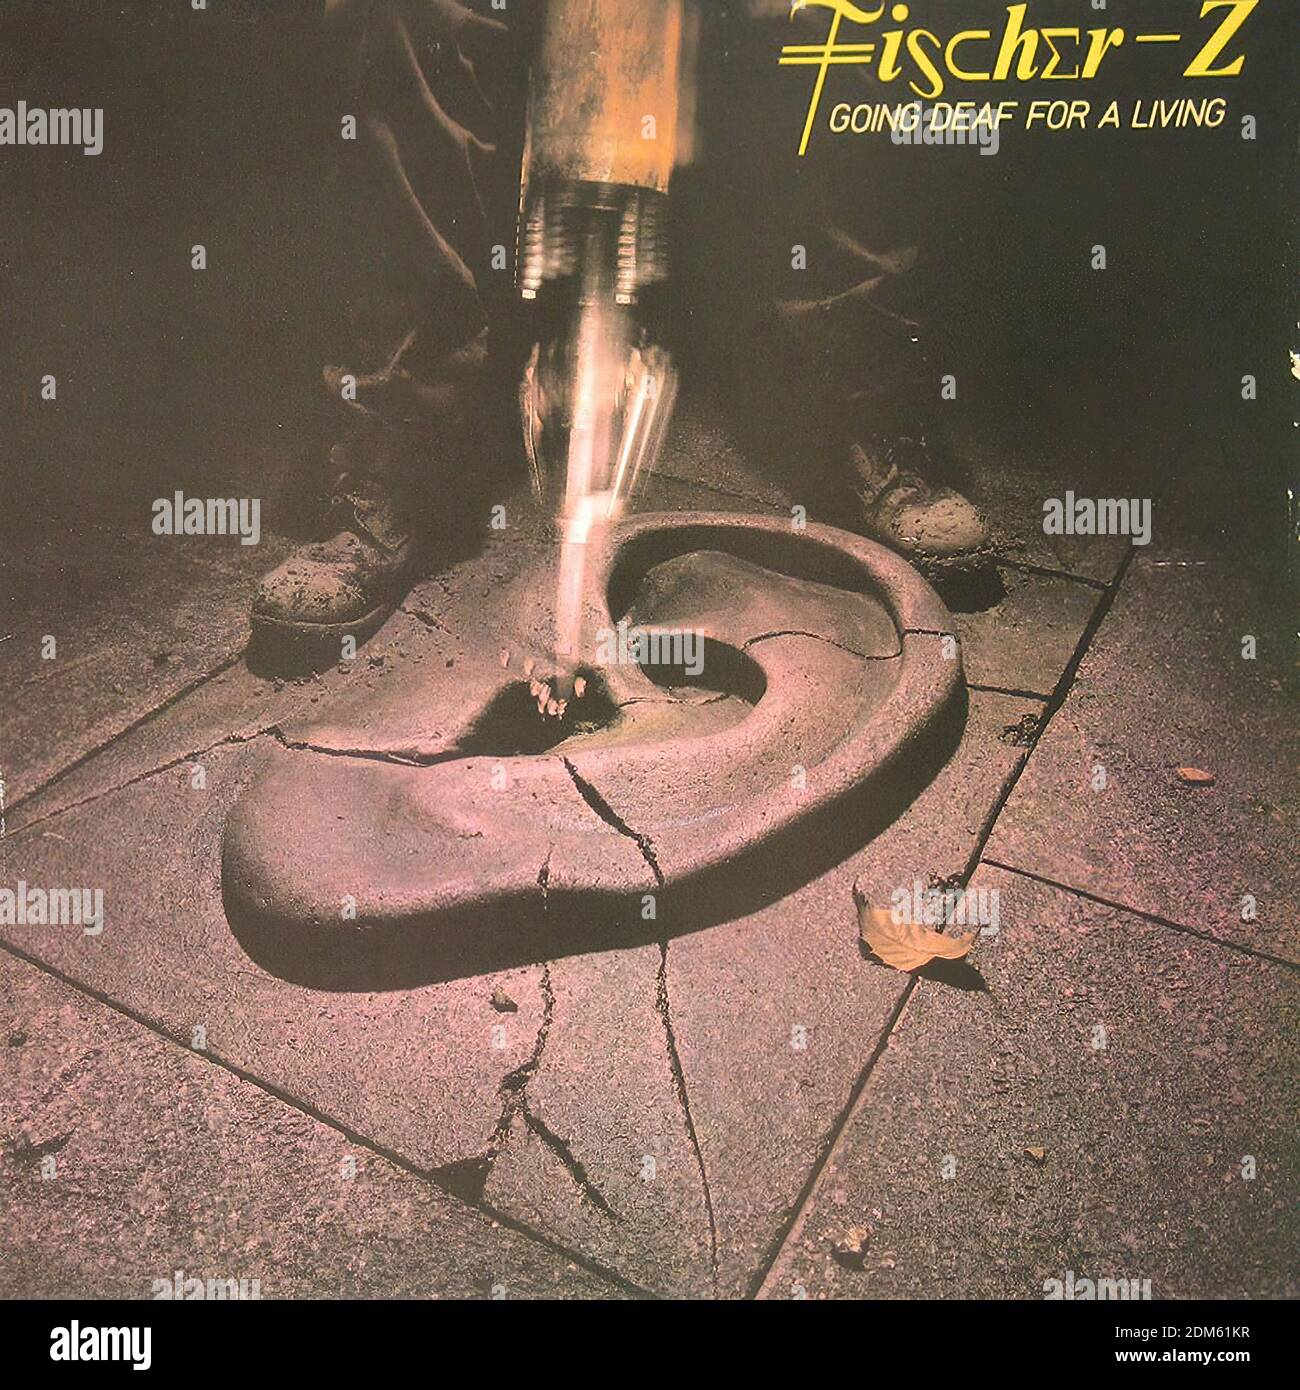 FISCHER Z GOING DEAF FOR A LIVING - Vintage Vinyl Record Cover Stock Photo  - Alamy